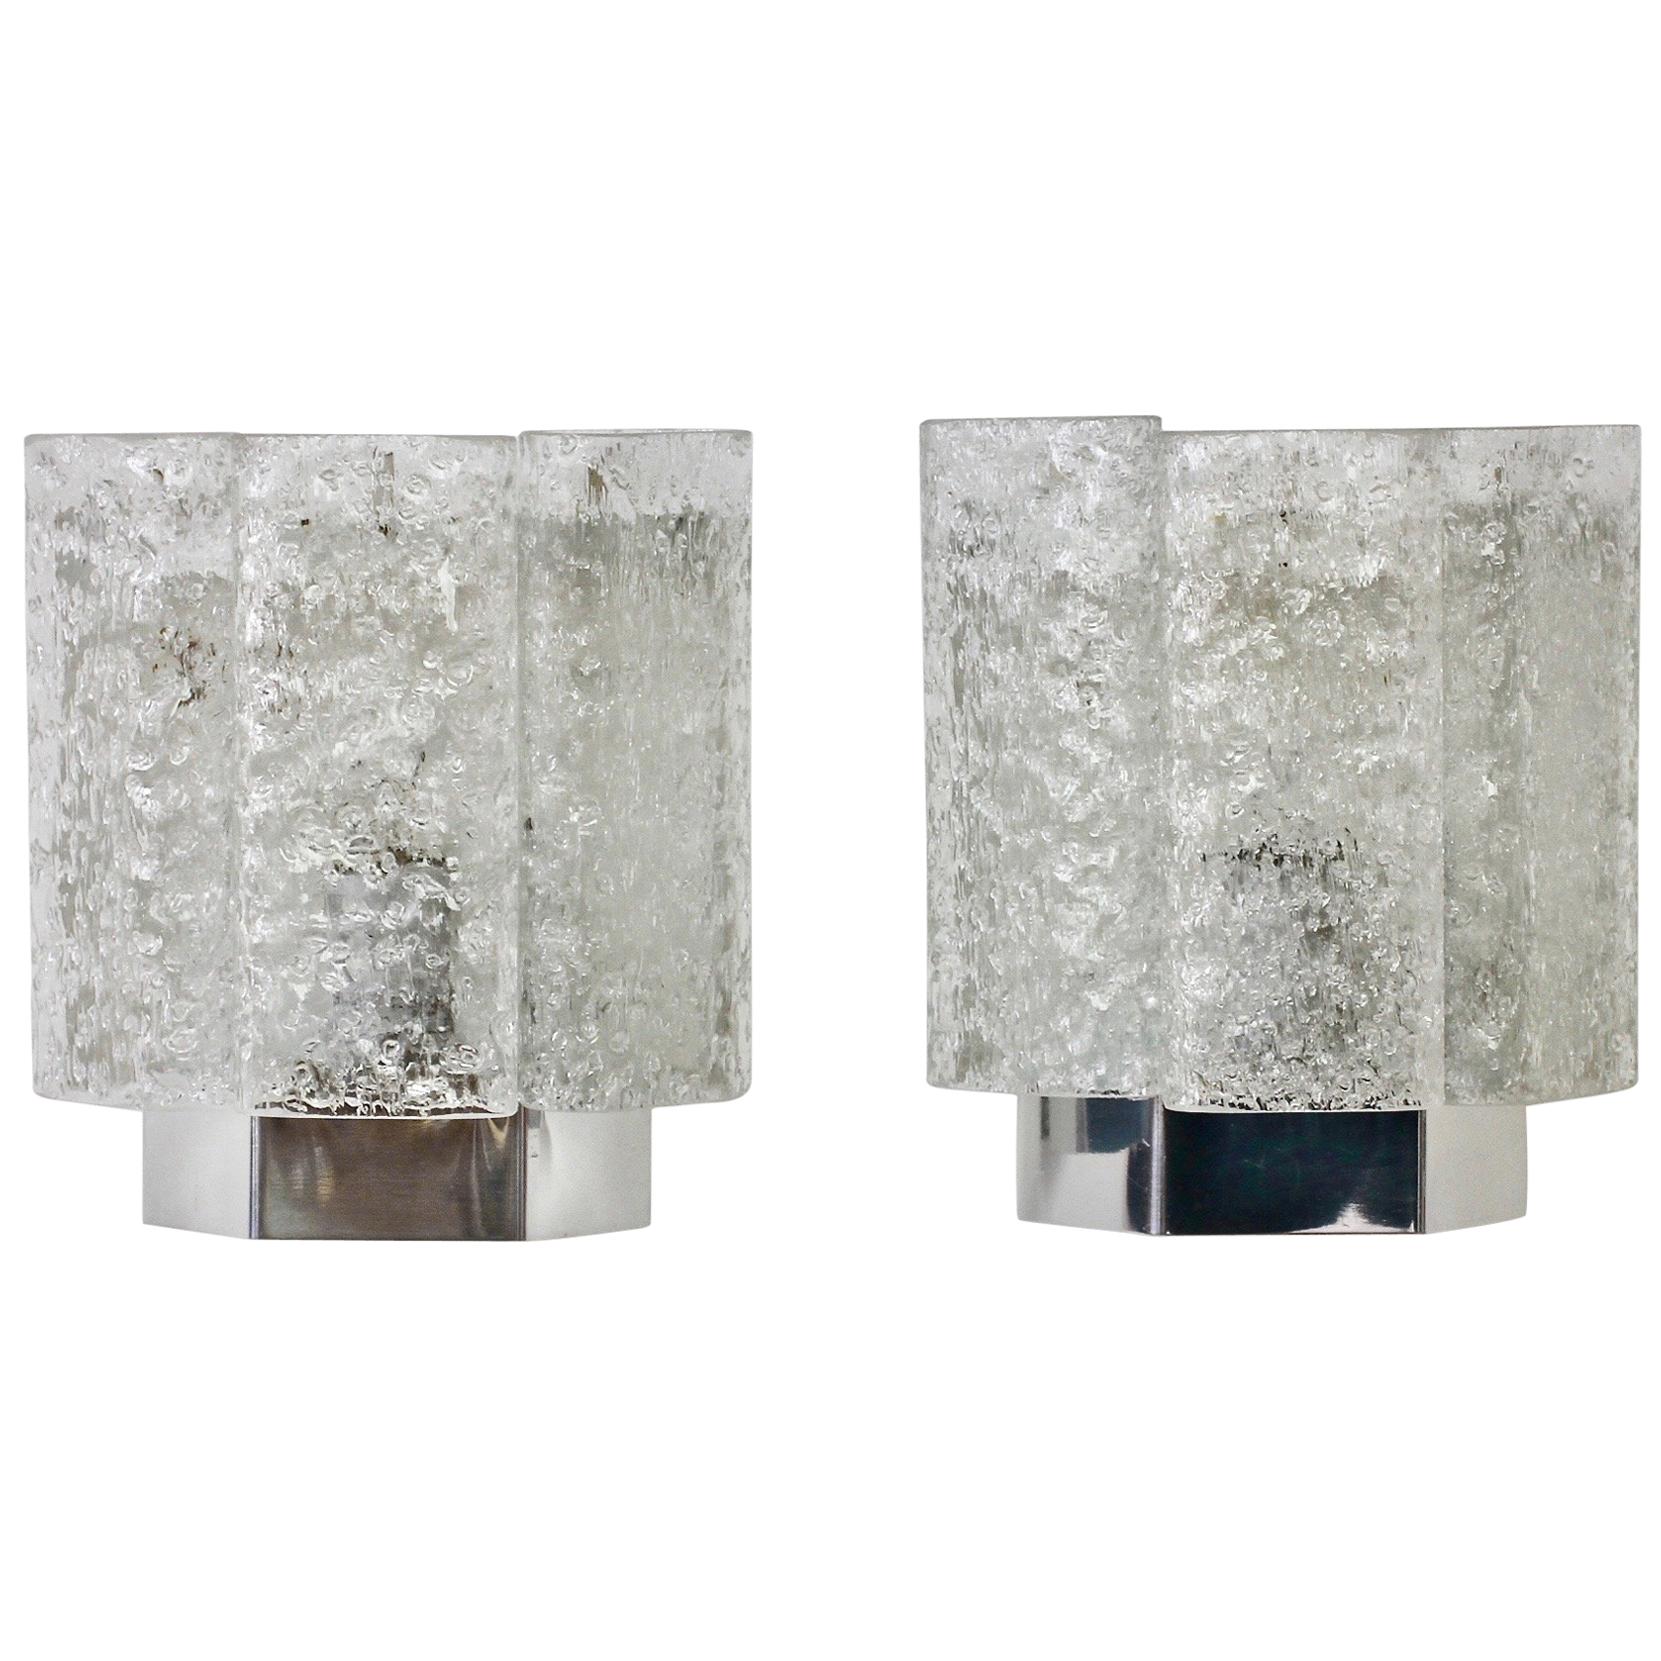 Pair of 1970s Vintage Frit Glass Wall Lights or Vanity Sconces by Doria Leuchten